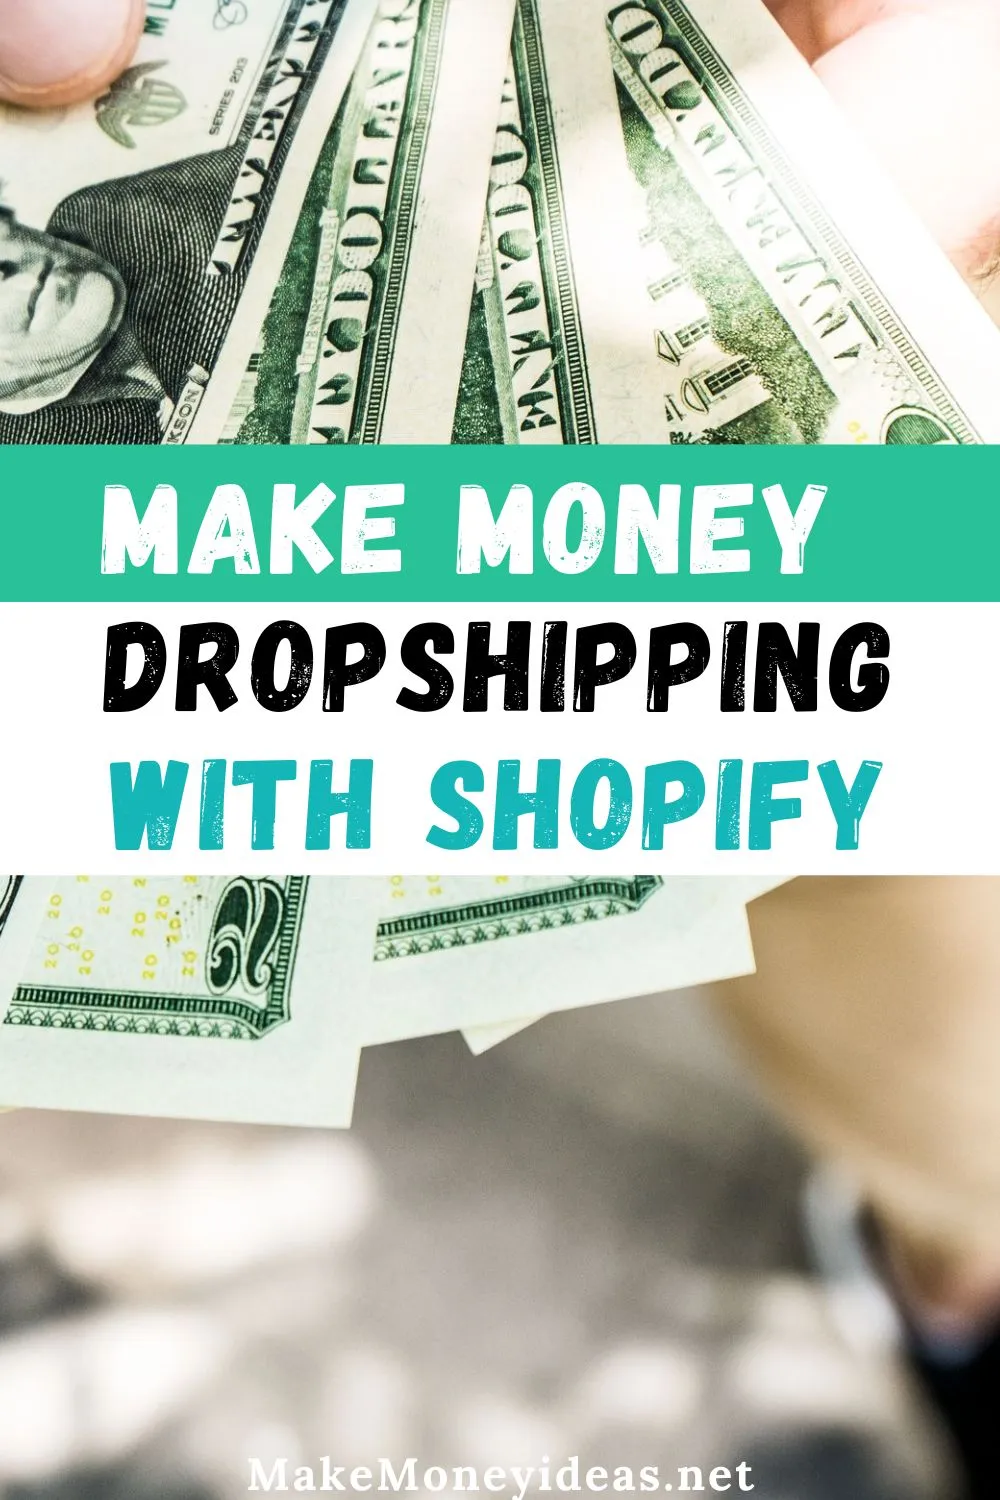 Make money drop shipping with shopify